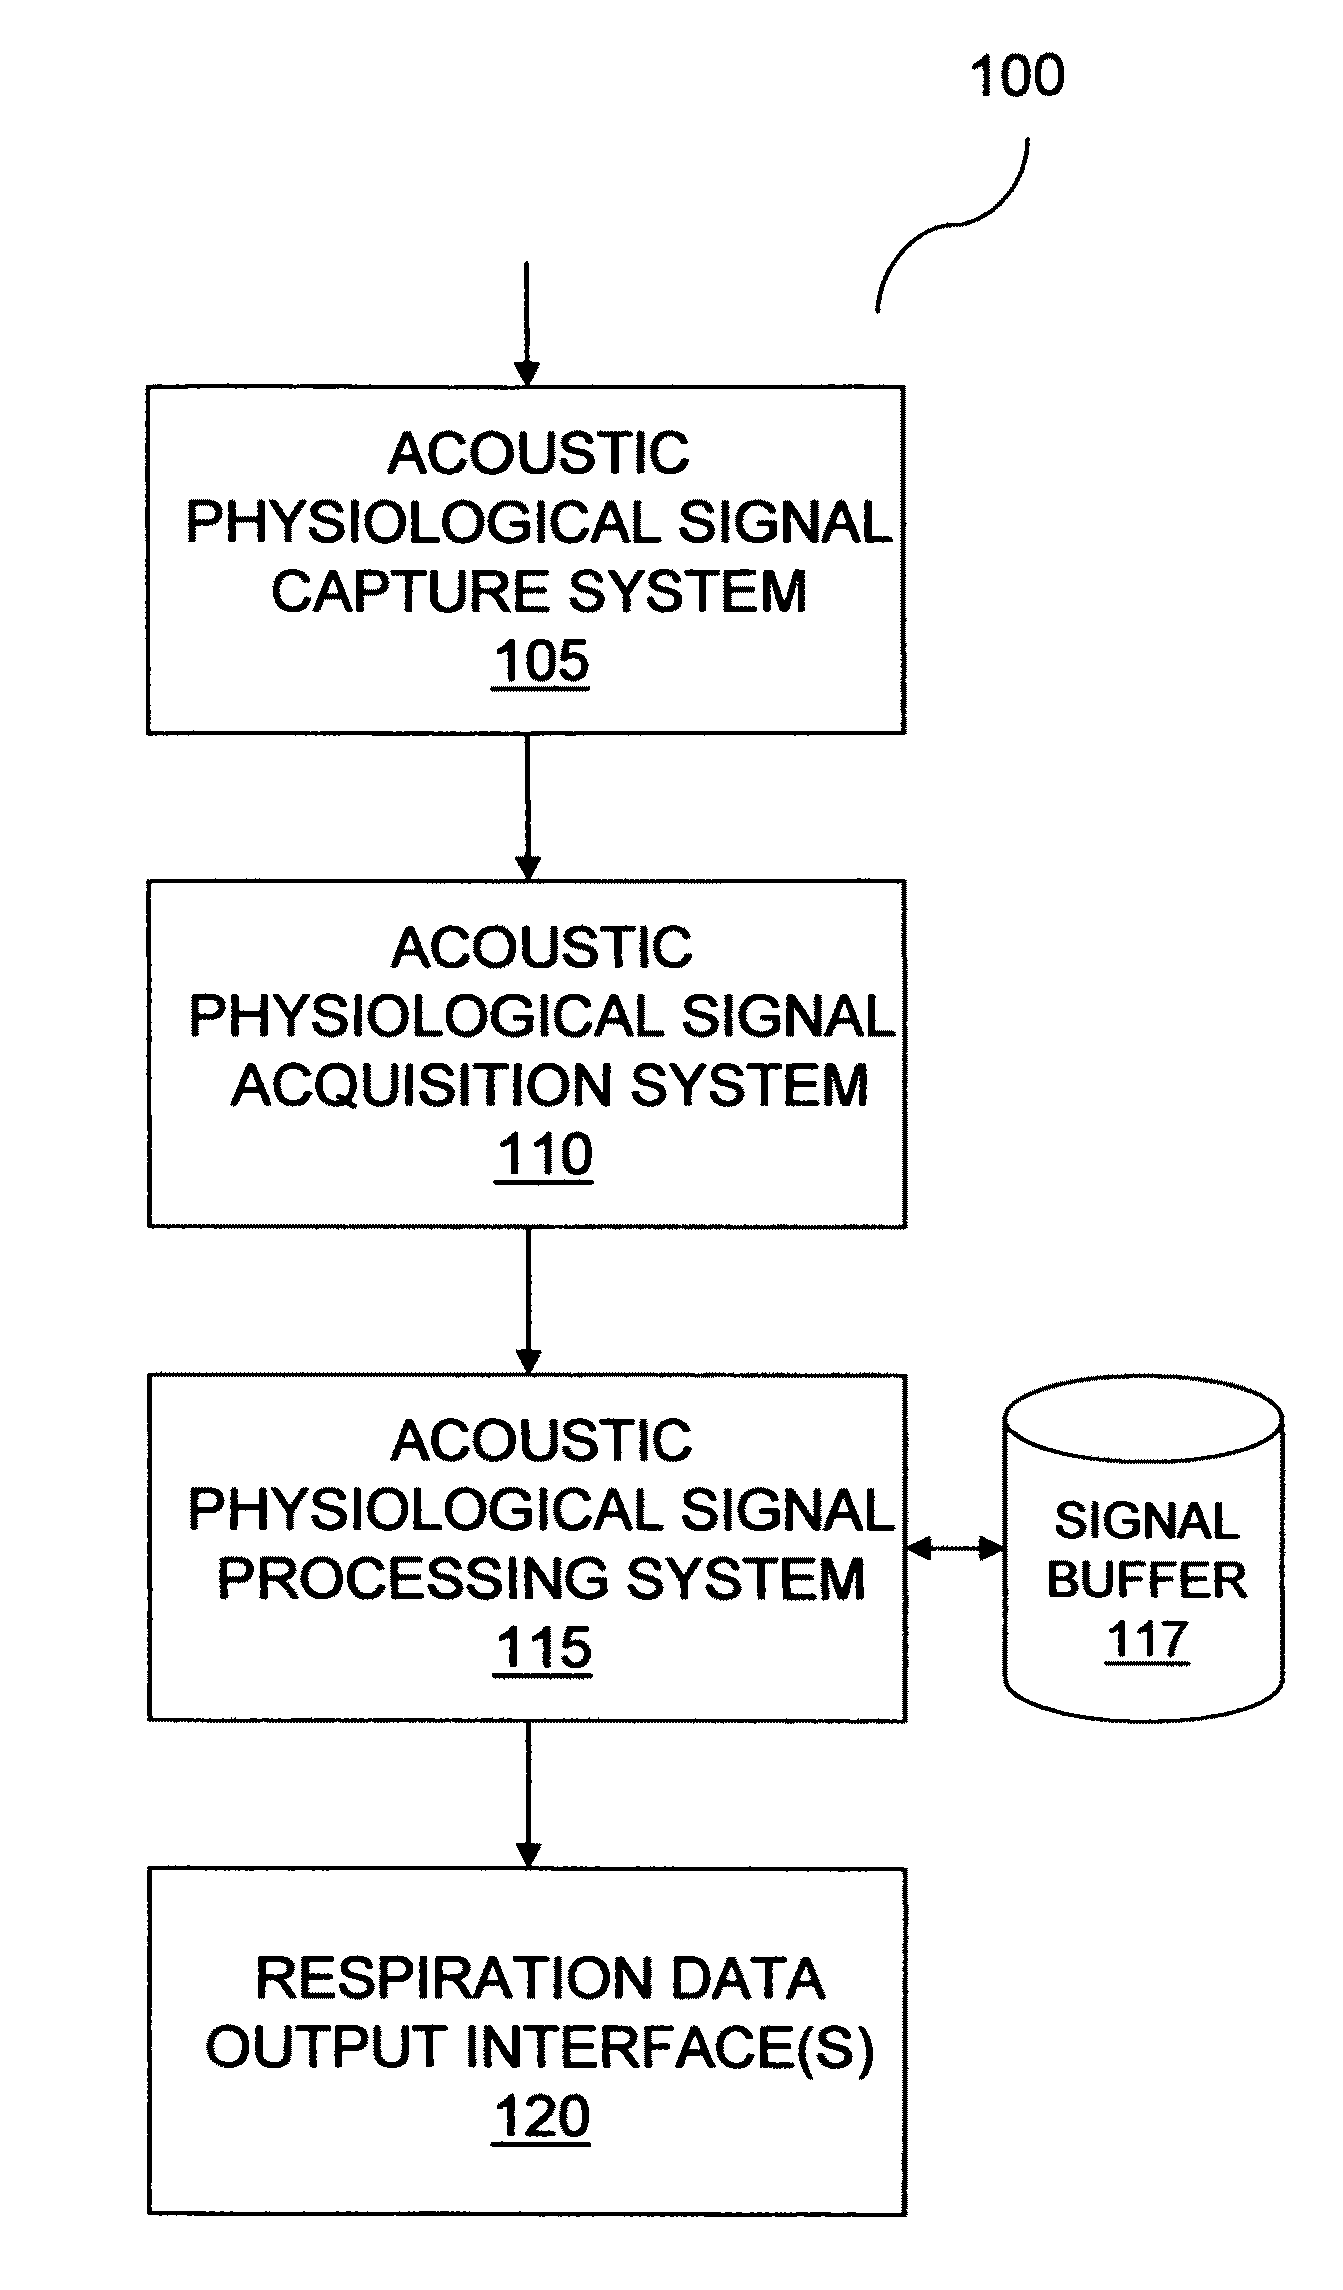 Method and system for reliable inspiration-to-expiration ratio extraction from acoustic physiological signal